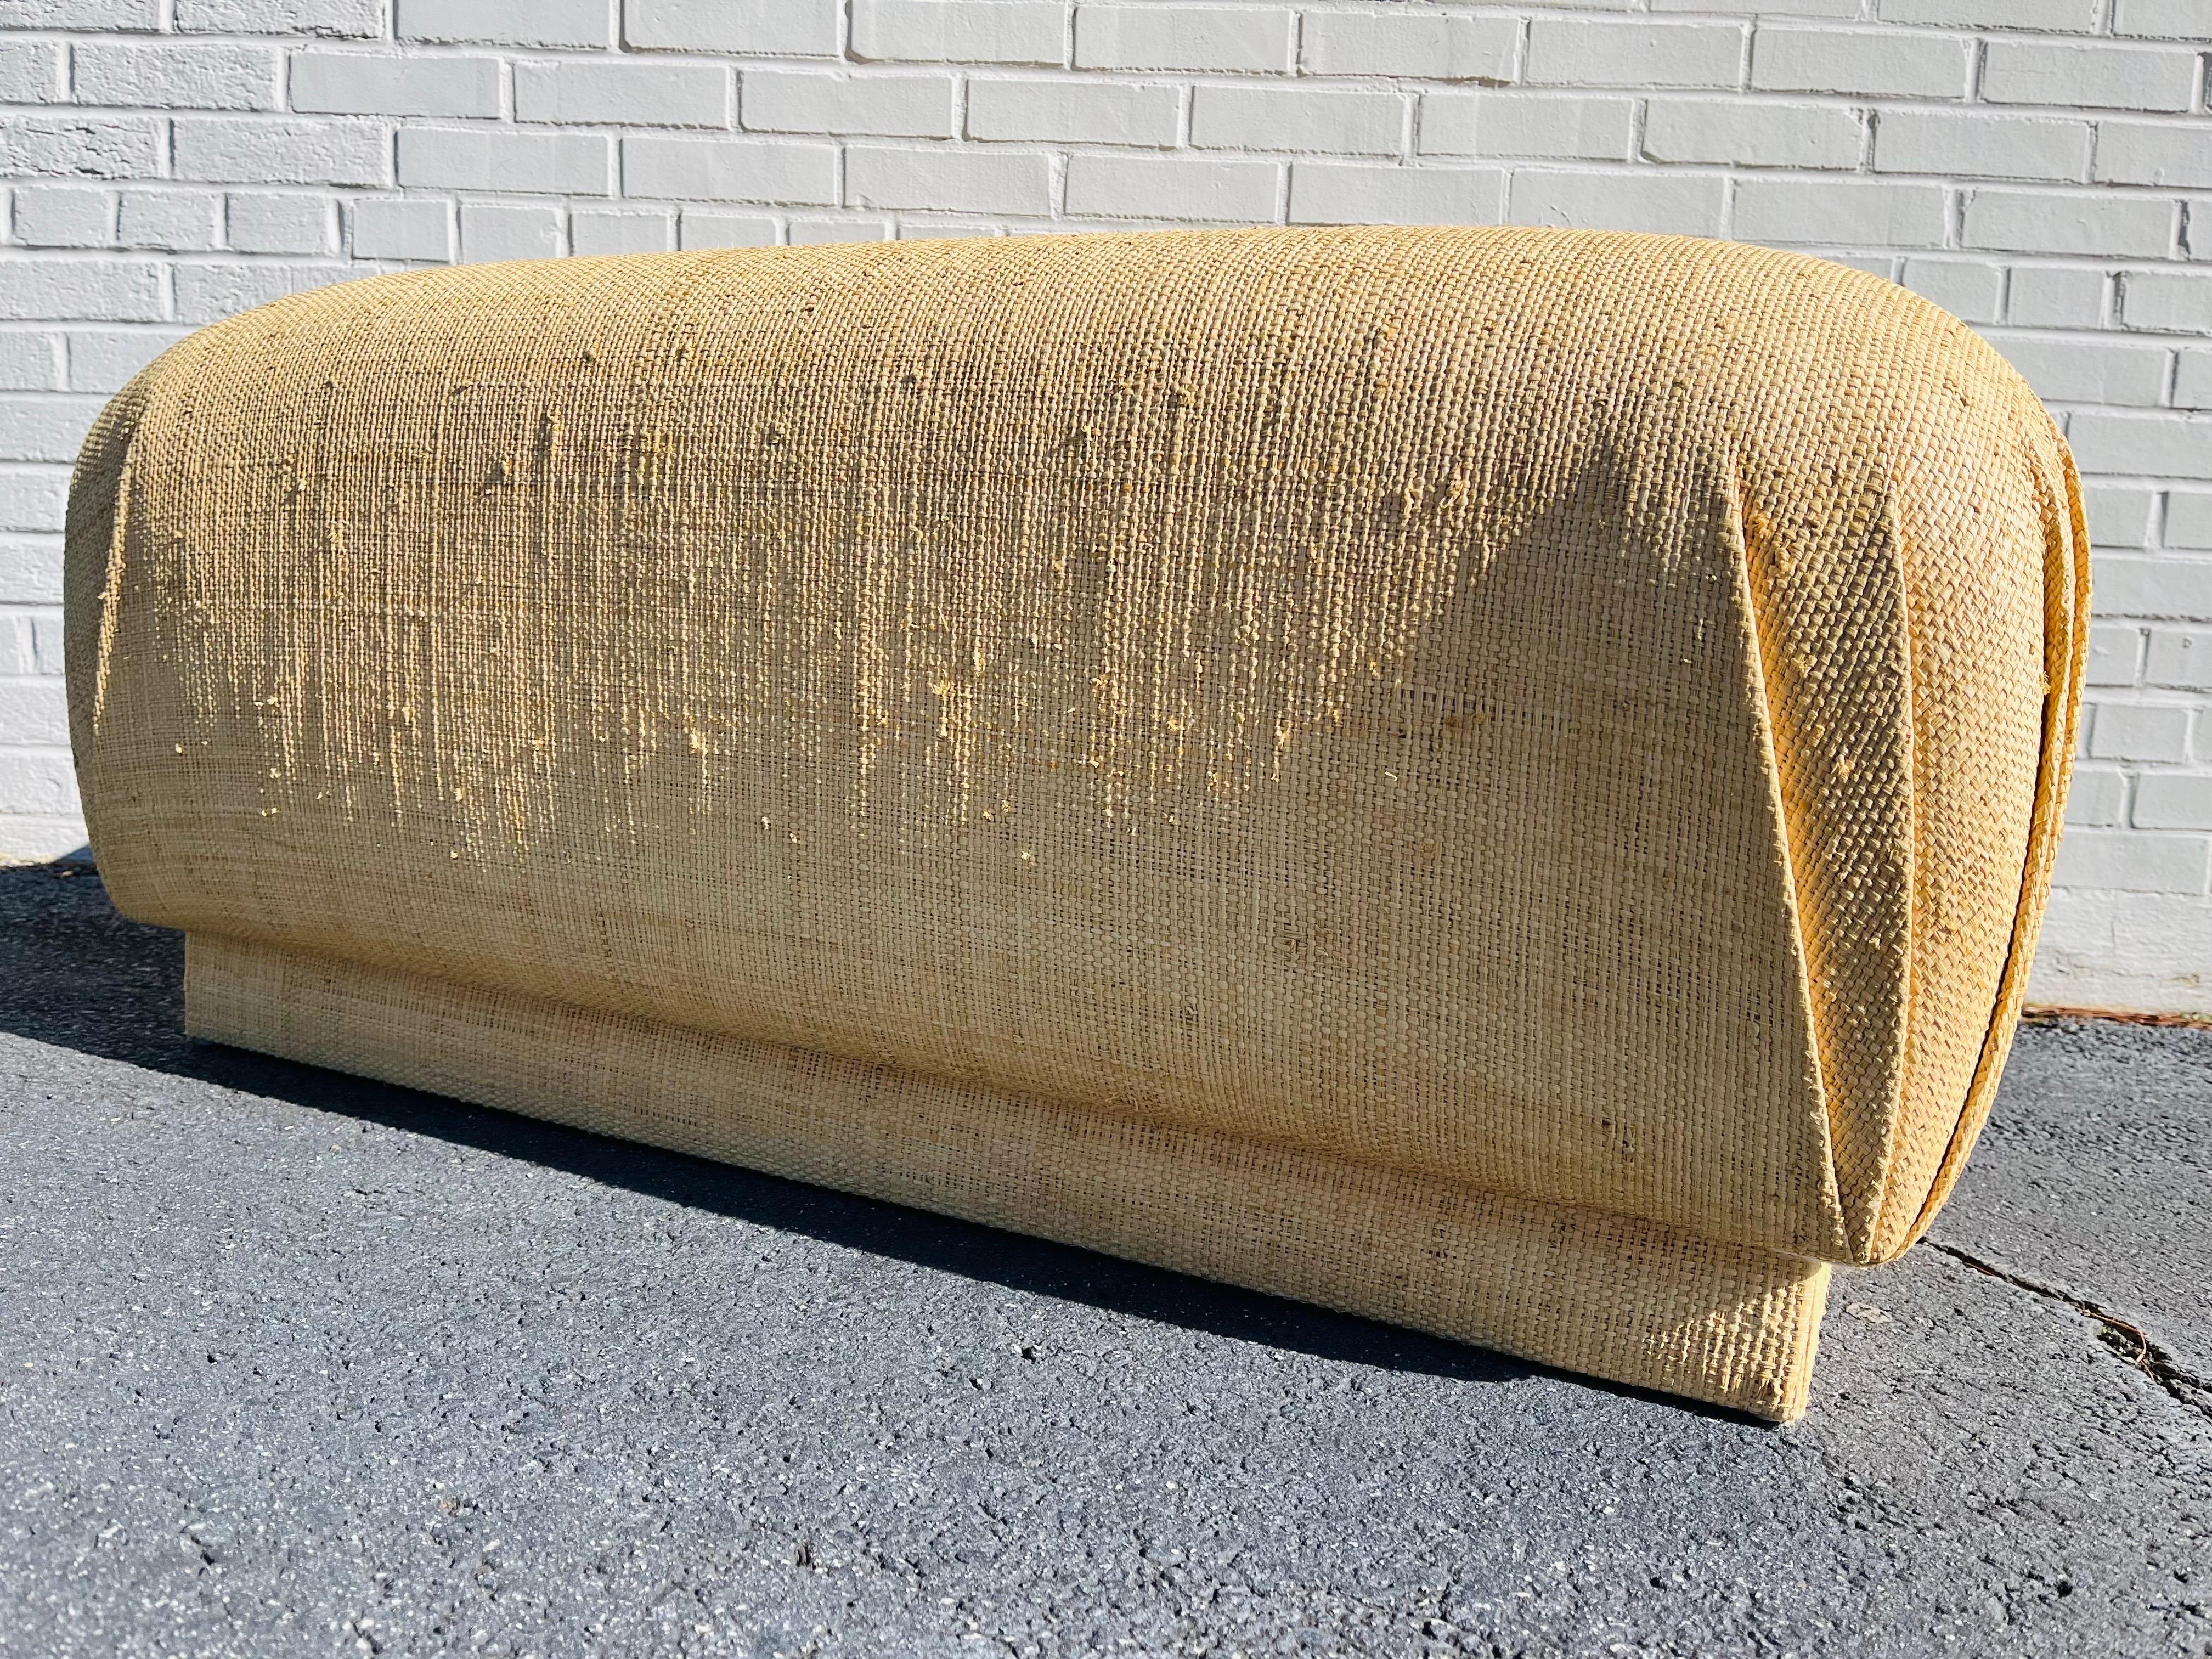 A vintage, late 20th century (possibly early 21st Century) grass cloth upholstered large souffle style pouf or ottoman. This oversized, rectangular footstool can pull double, no make that triple duty, as a place to kick up your feet, a cozy seat or